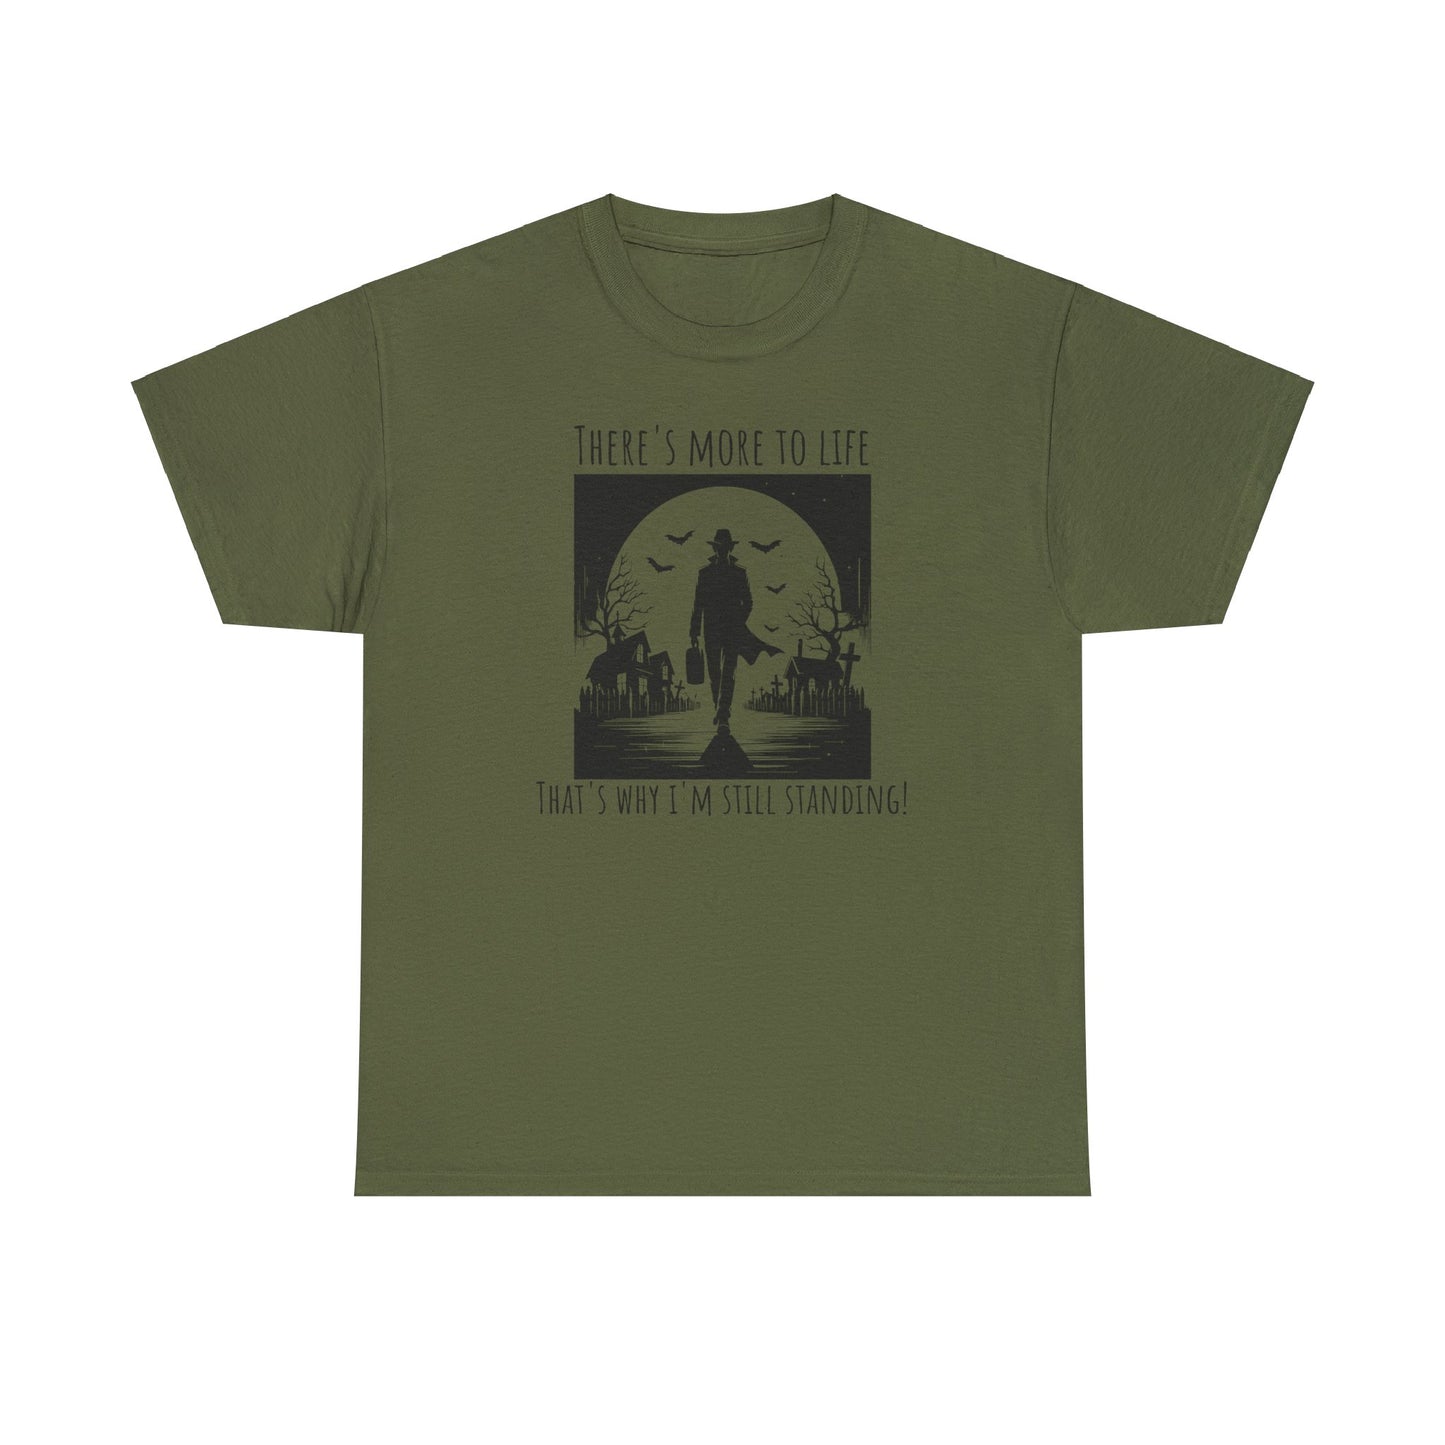 Still Standing T-Shirt For More To Life T Shirt For Sole Survivor TShirt For Hanging In There